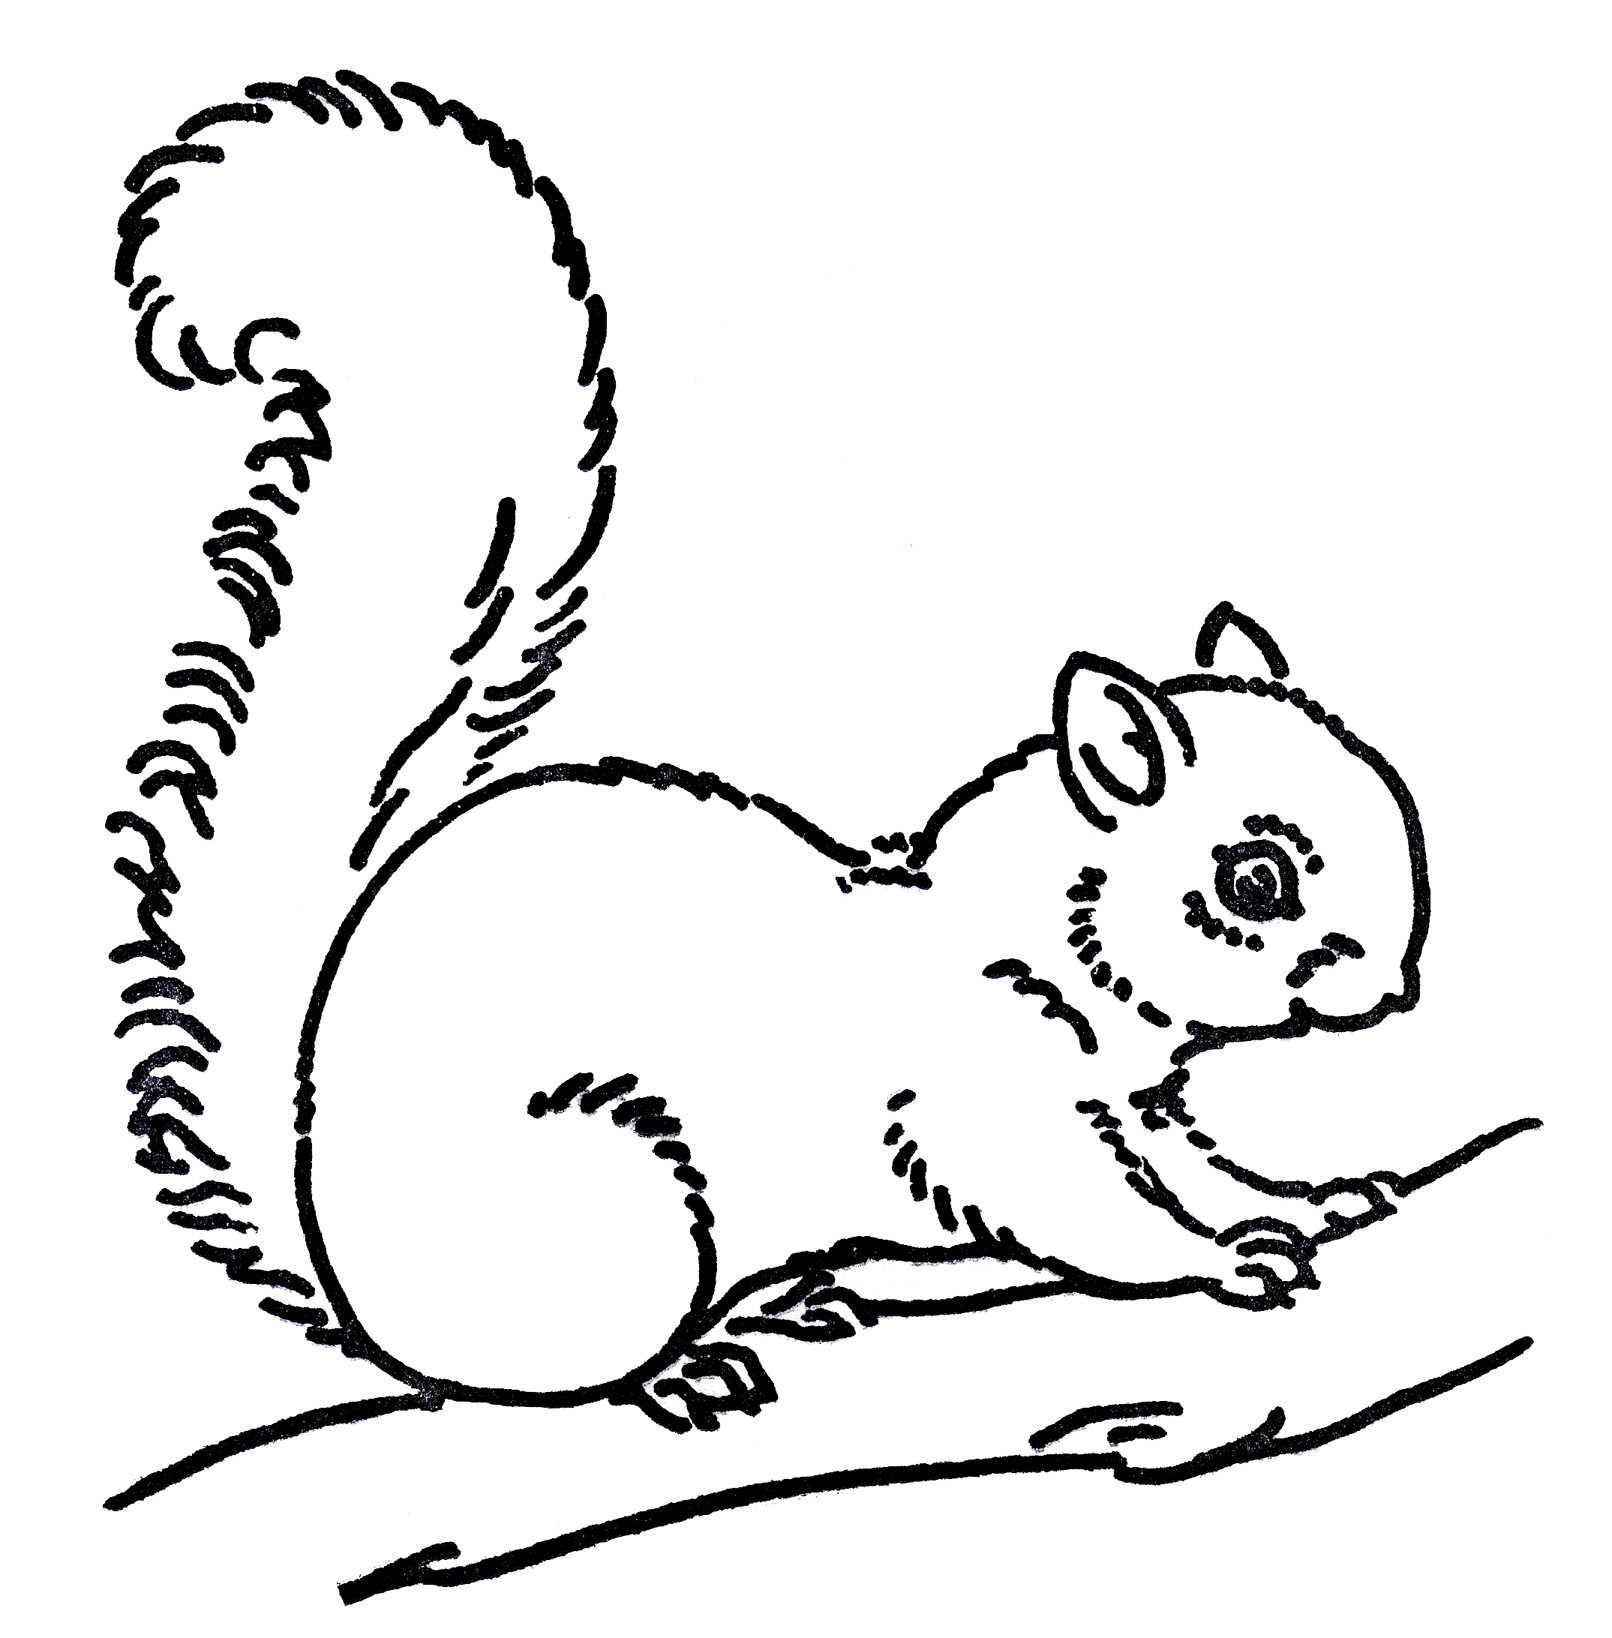 Free Line Art Images   Squirrel Drawings   The Graphics Fairy